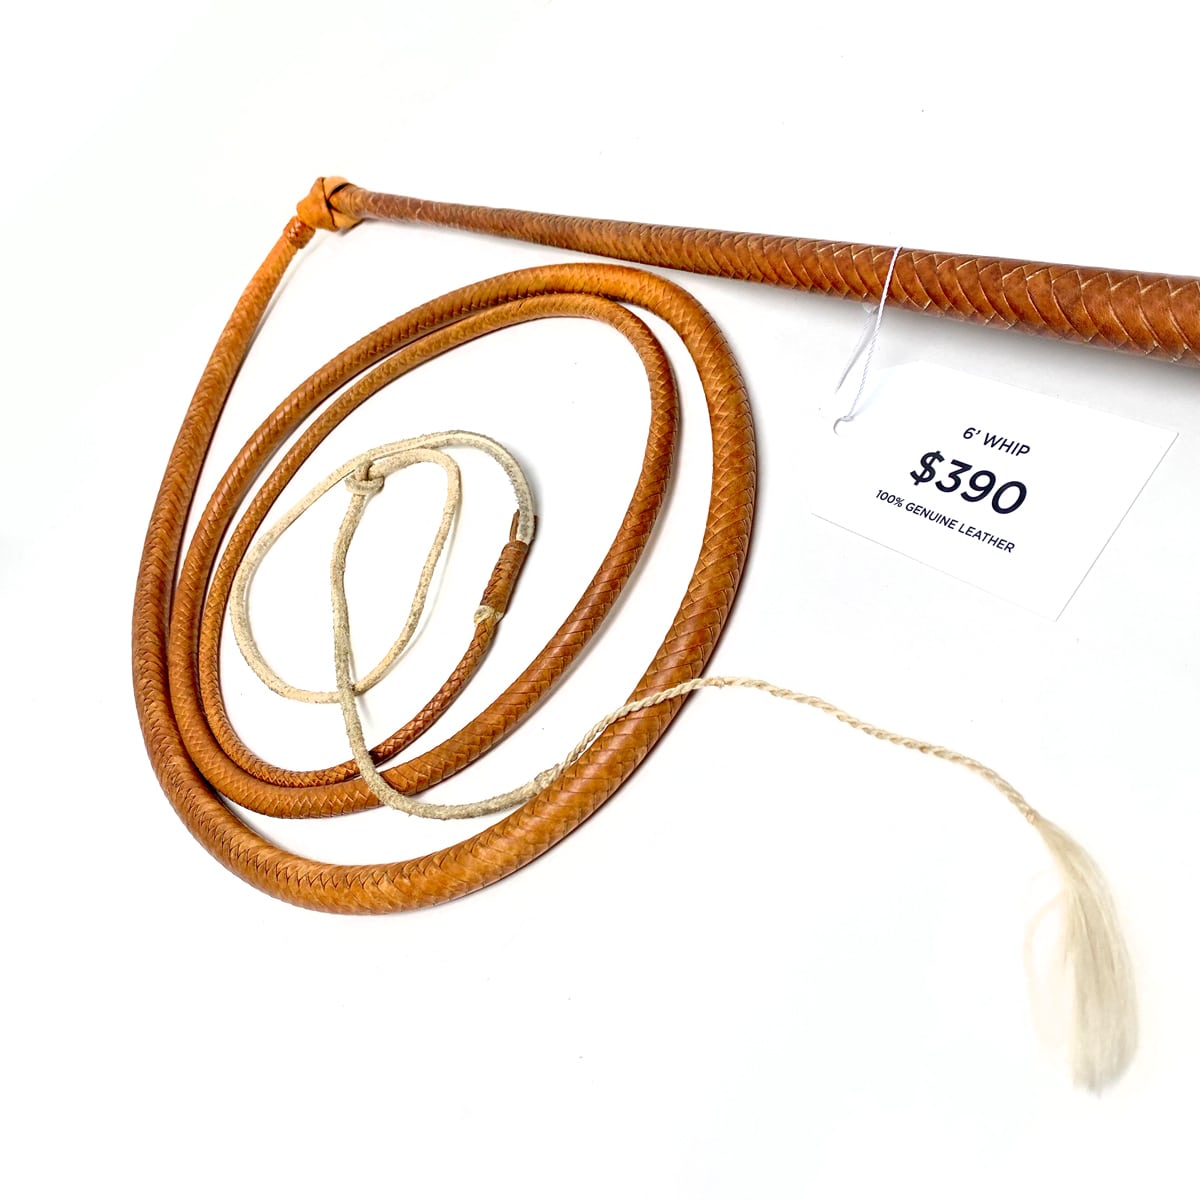 n Indians™ 6' Leather Whip - Yellowstone Press